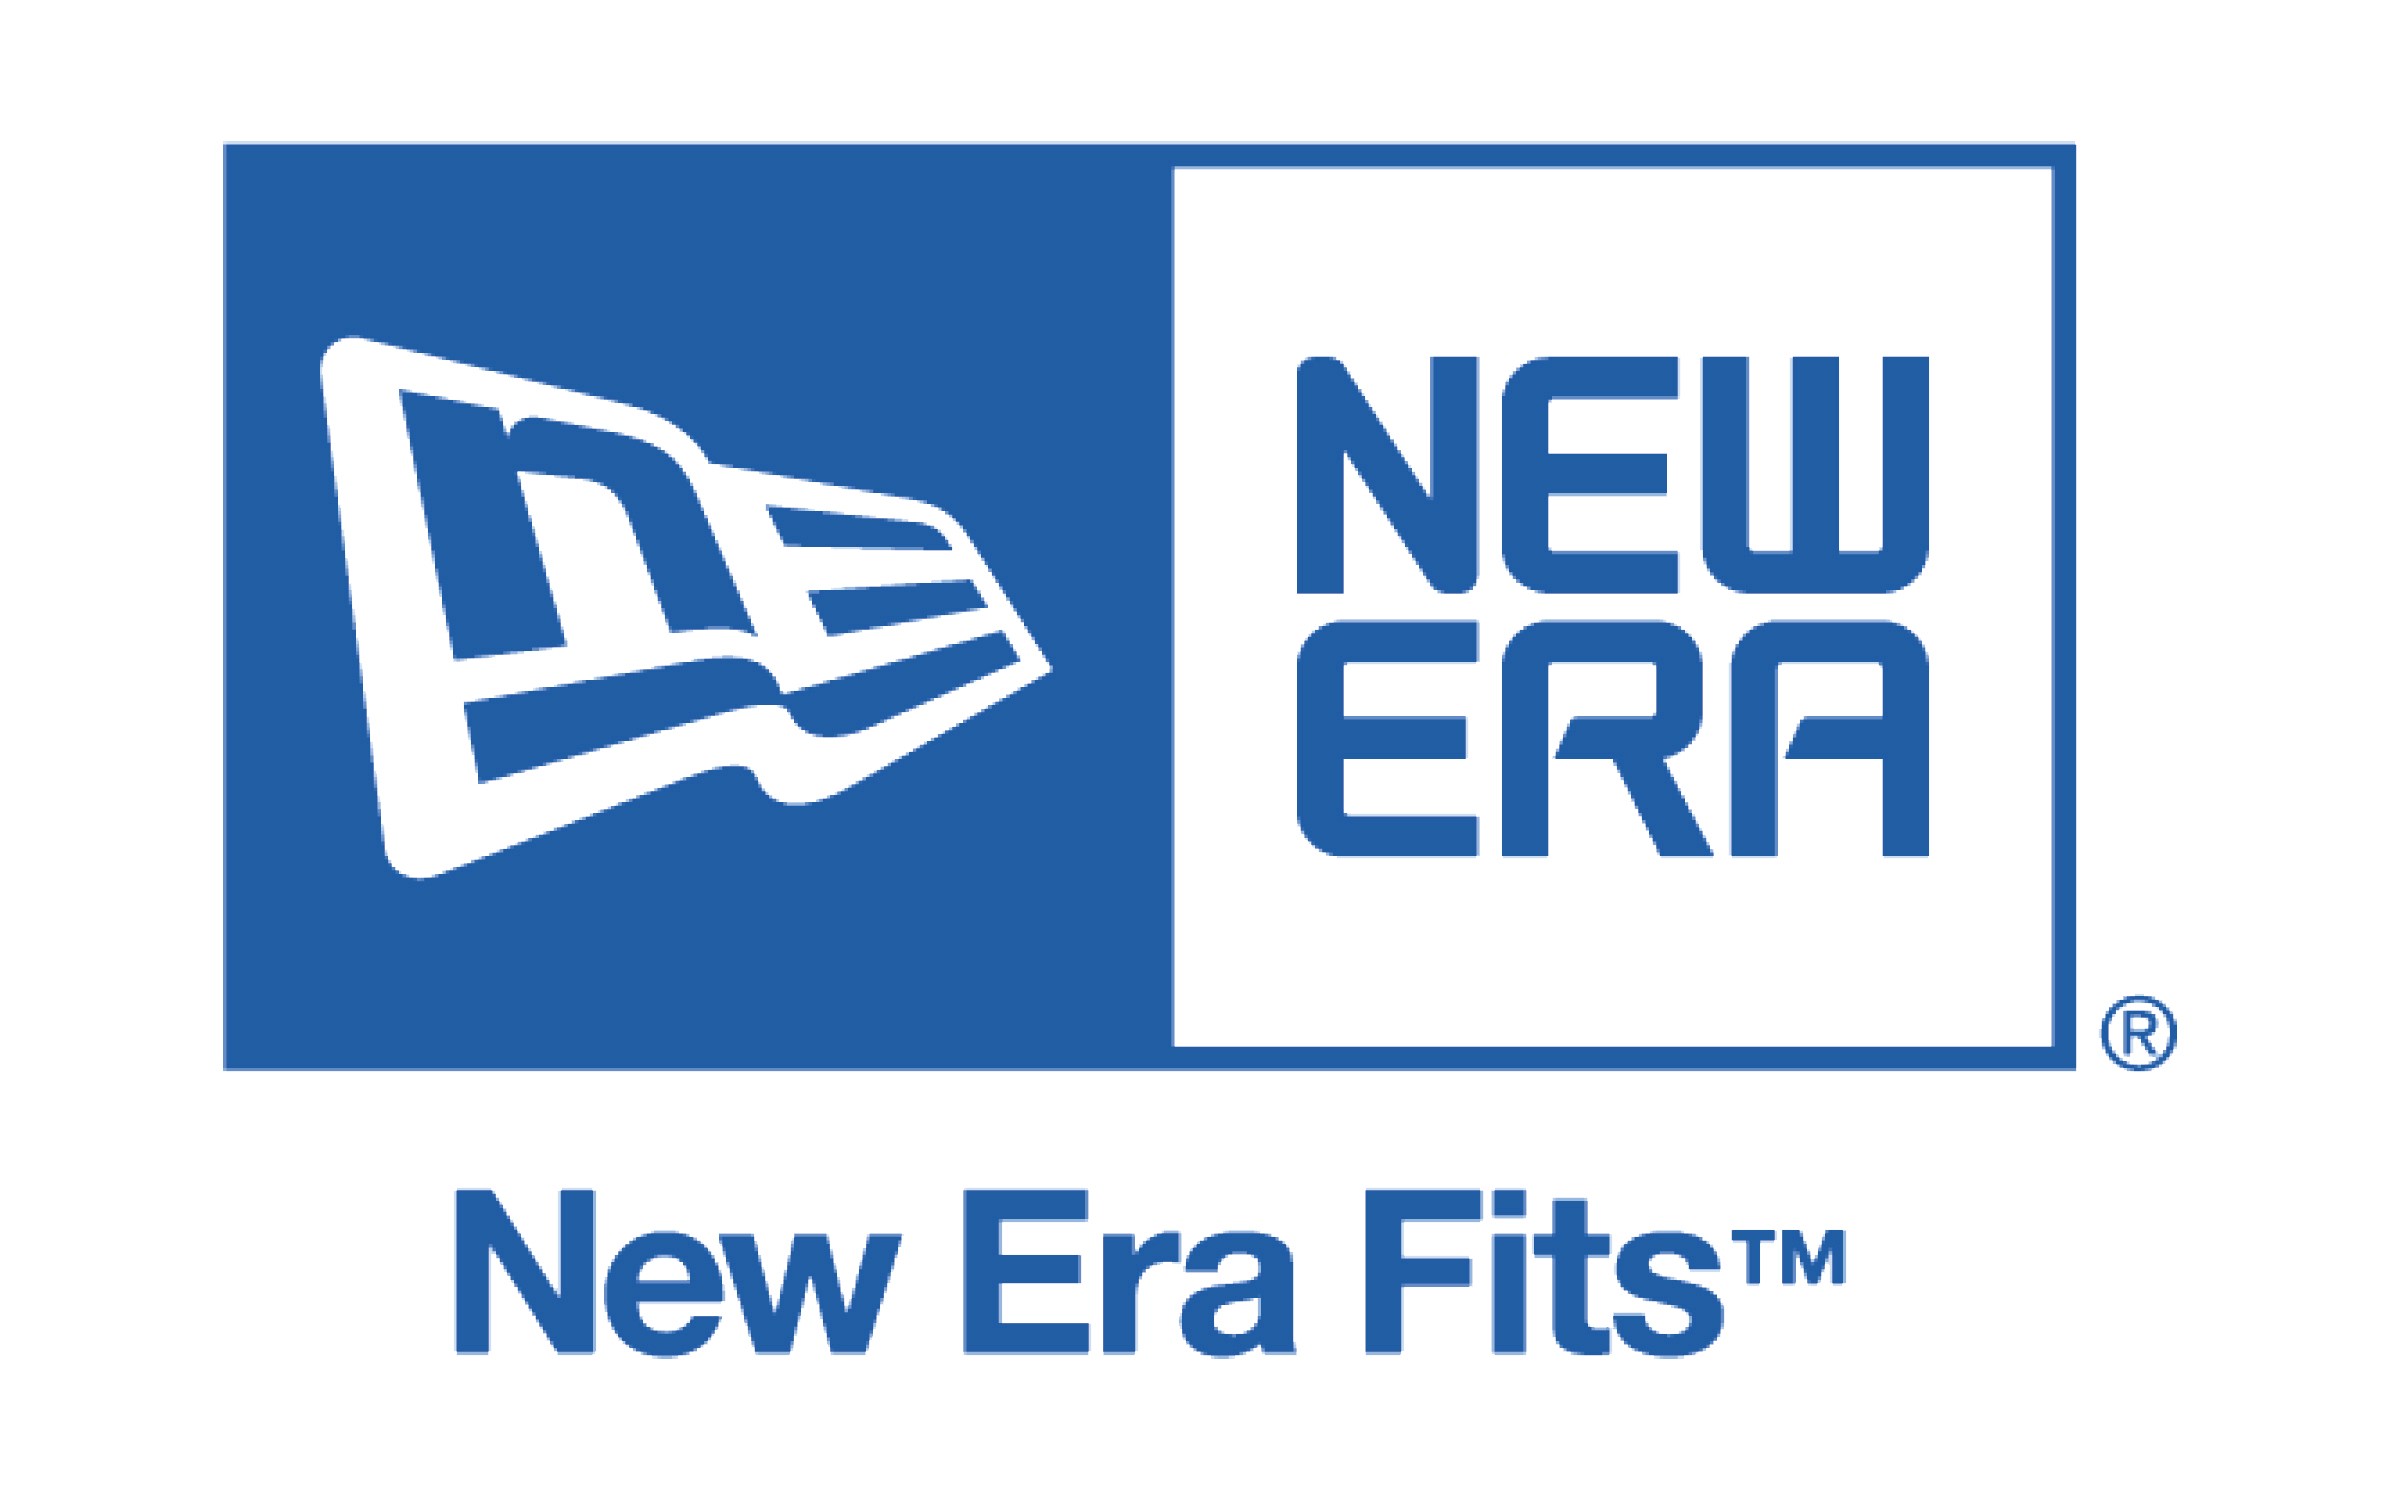 New Era Cap - New Era is the exclusive manufacturer and marketer of .